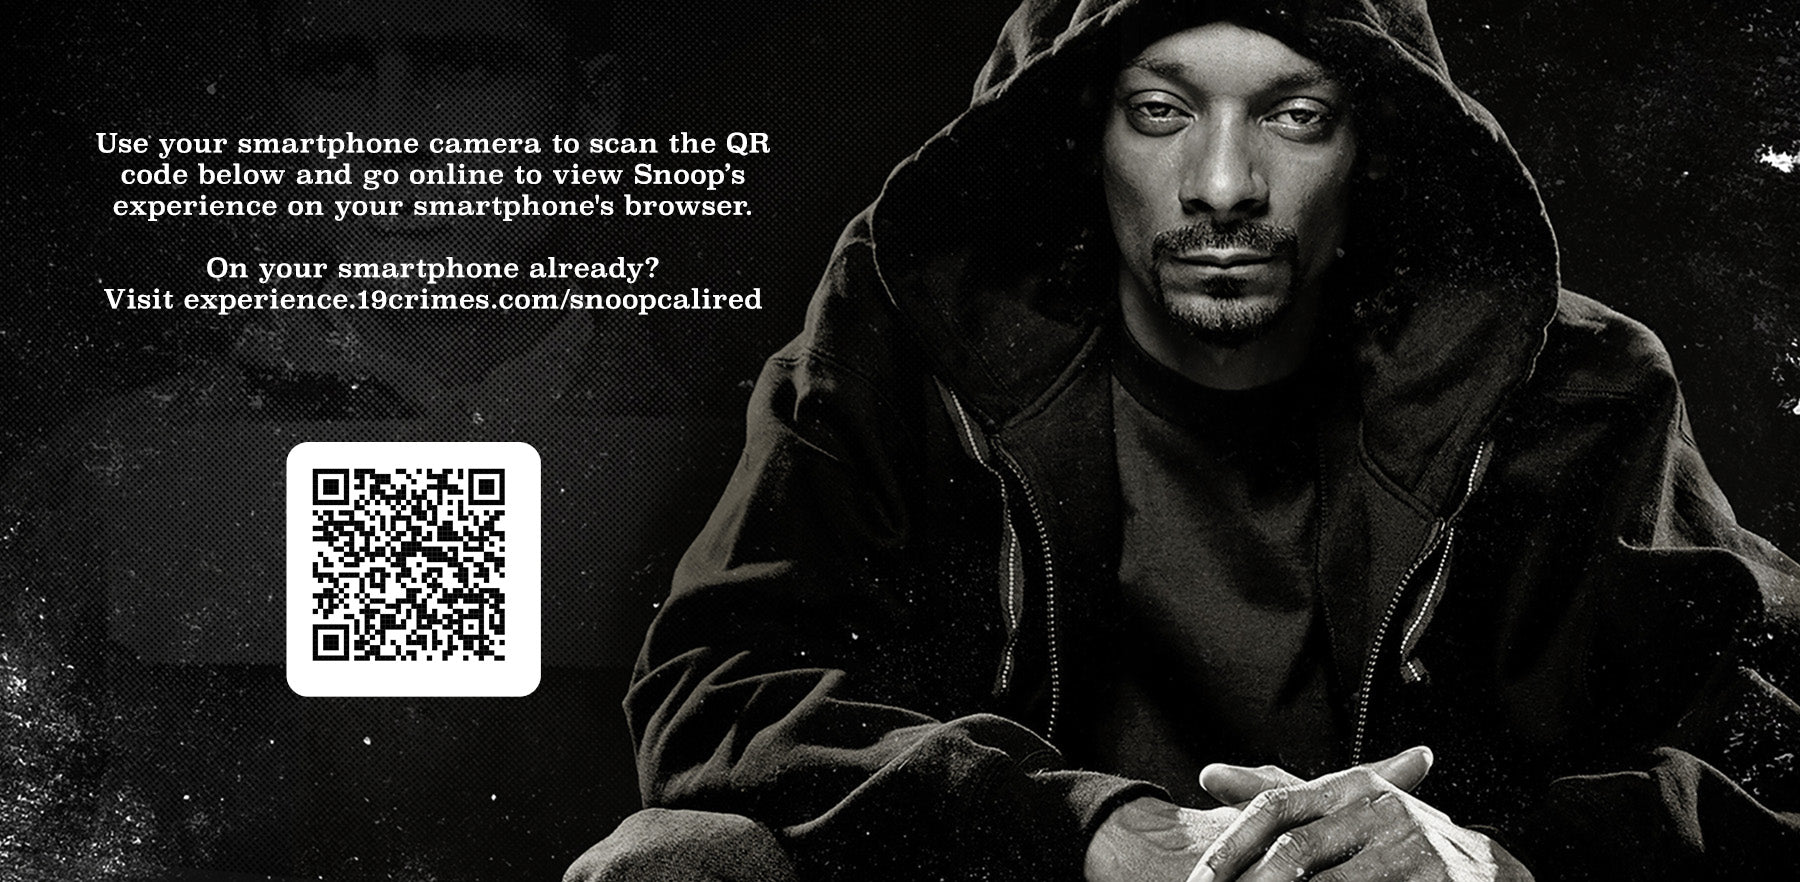 open experience.19crimes.com/snoopcalired on your mobile browser